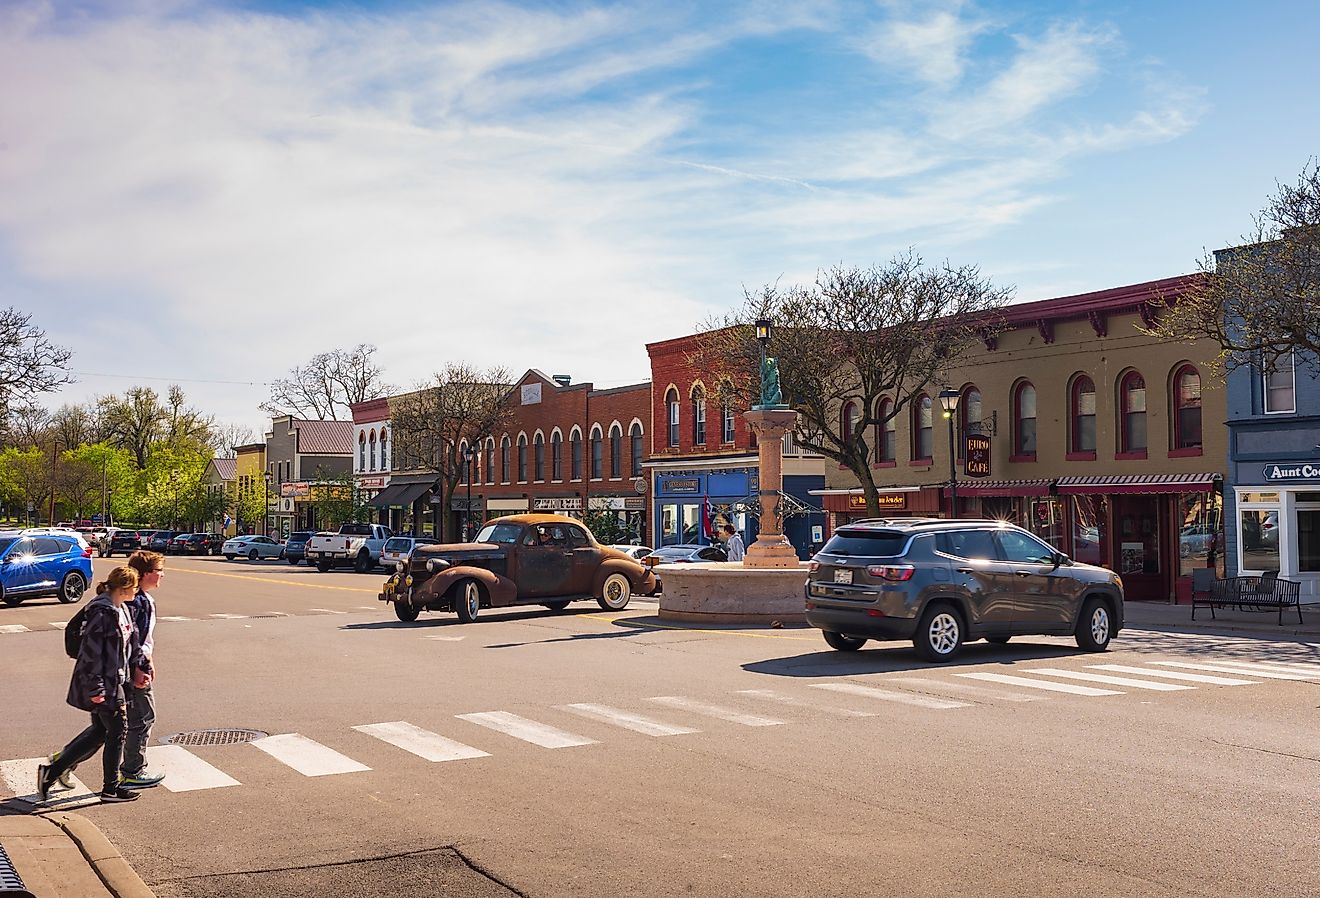 Geneseo is a town in the Finger Lakes region of New York. Editorial credit: JWCohen / Shutterstock.com